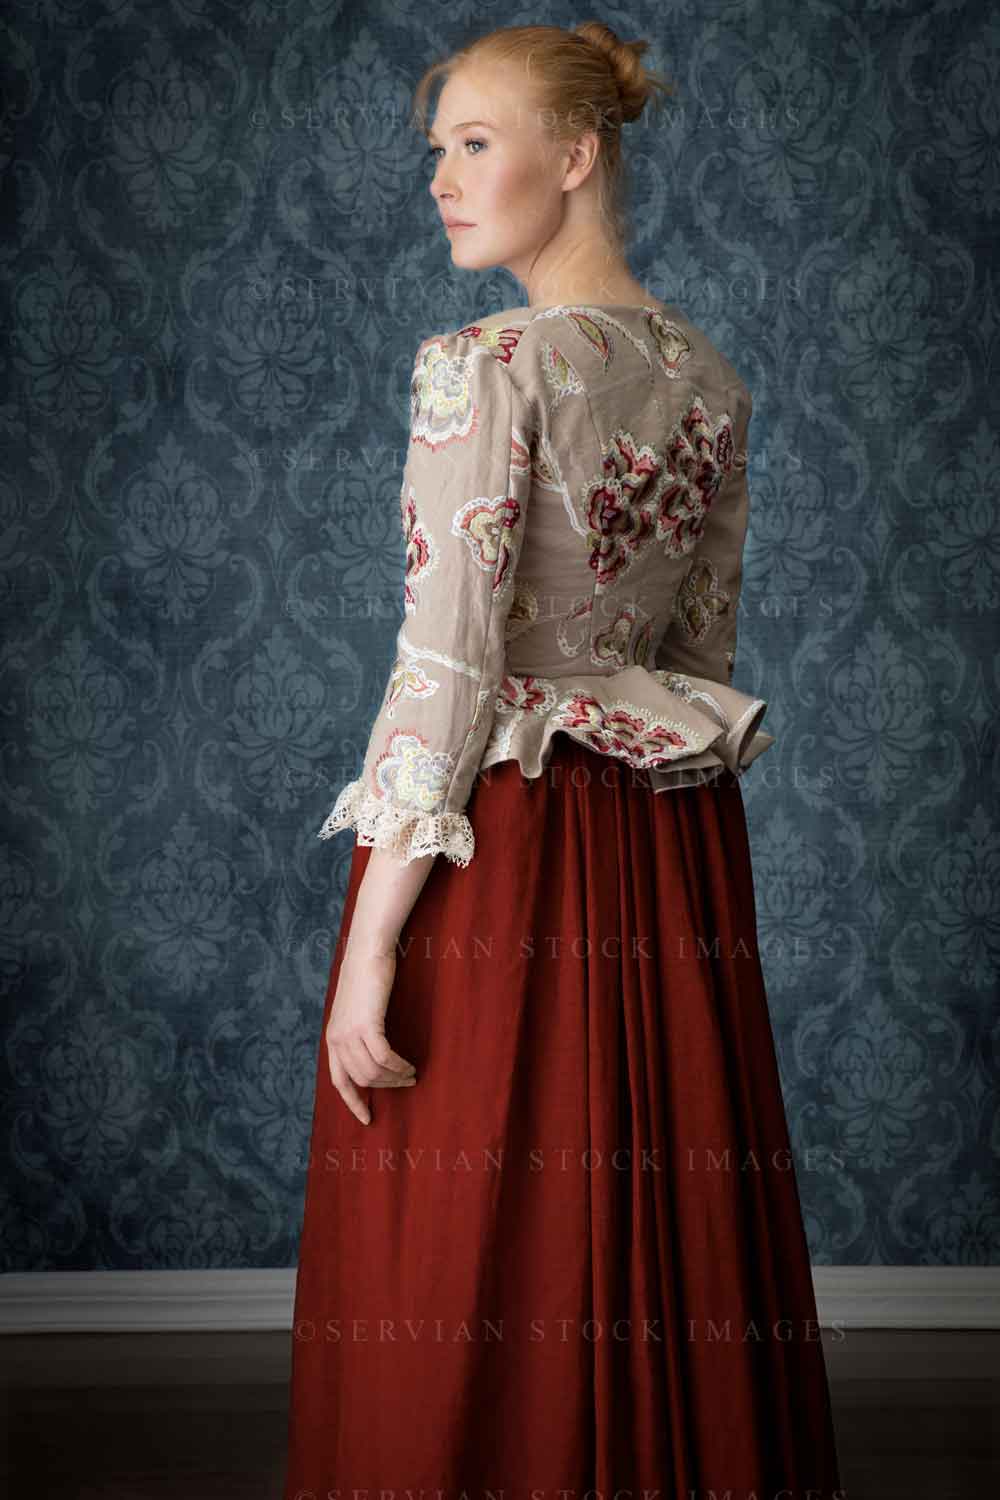 Renaissance woman in an embroidered bodice and red skirt (Lauren 7289)